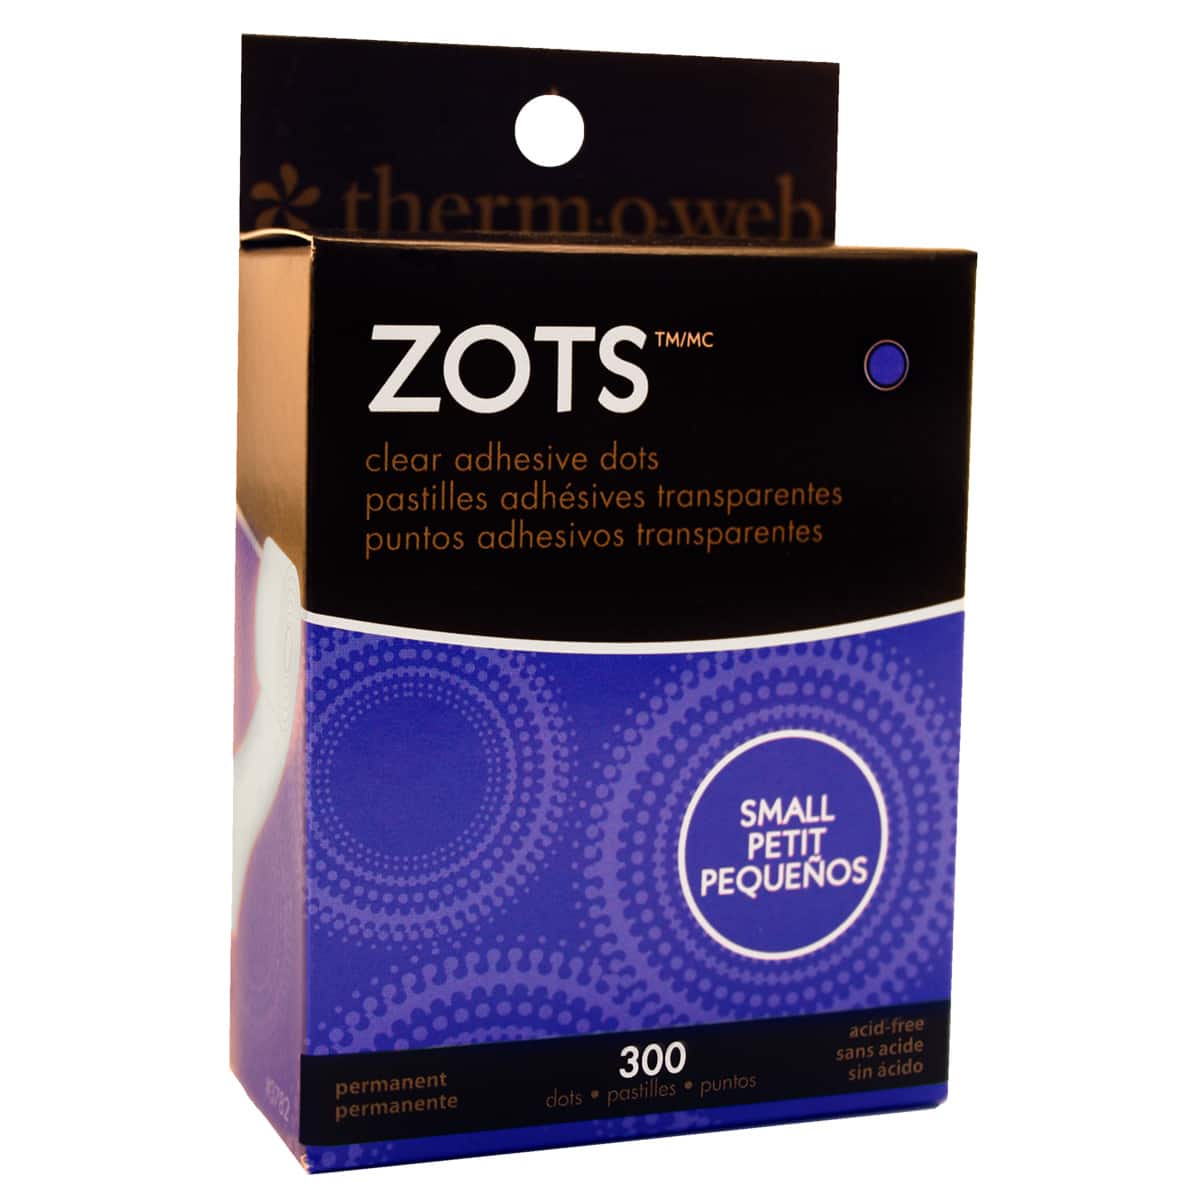 12 Packs: 300 ct. (3600 total) Therm O Web Zots&#x2122; Clear Adhesive Dots